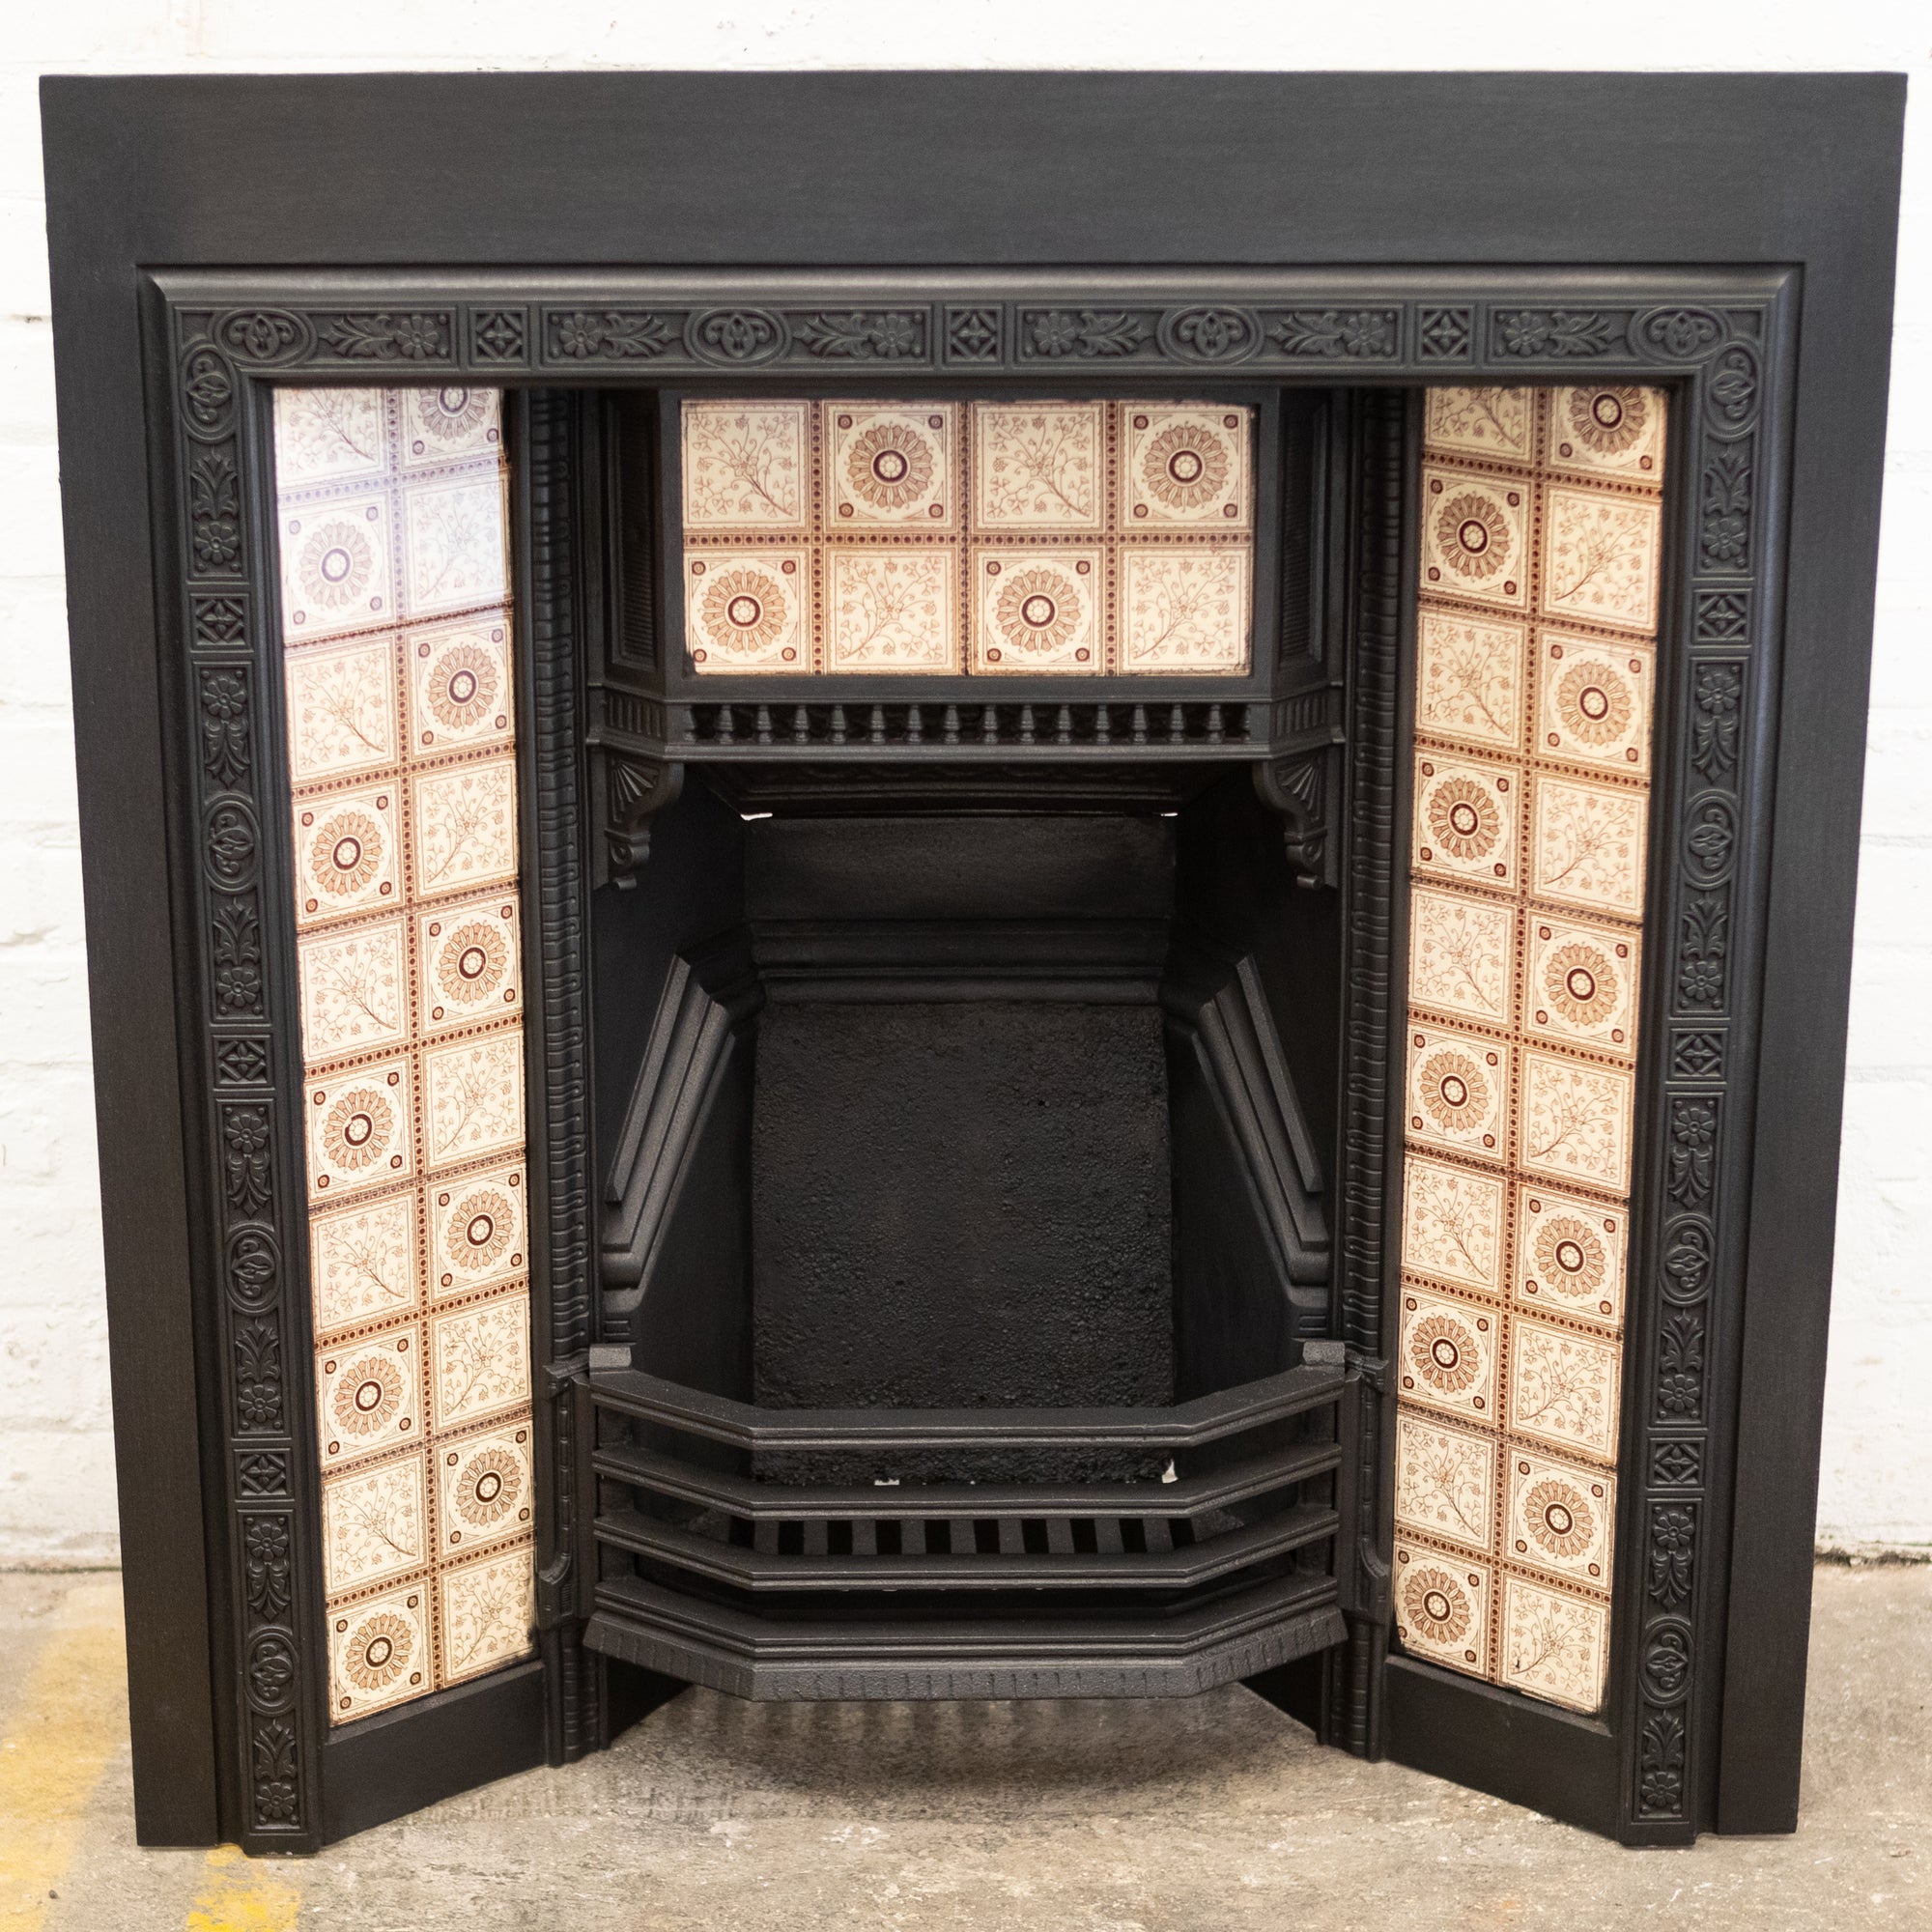 Antique Cast Iron Insert With Tiles | The Architectural Forum